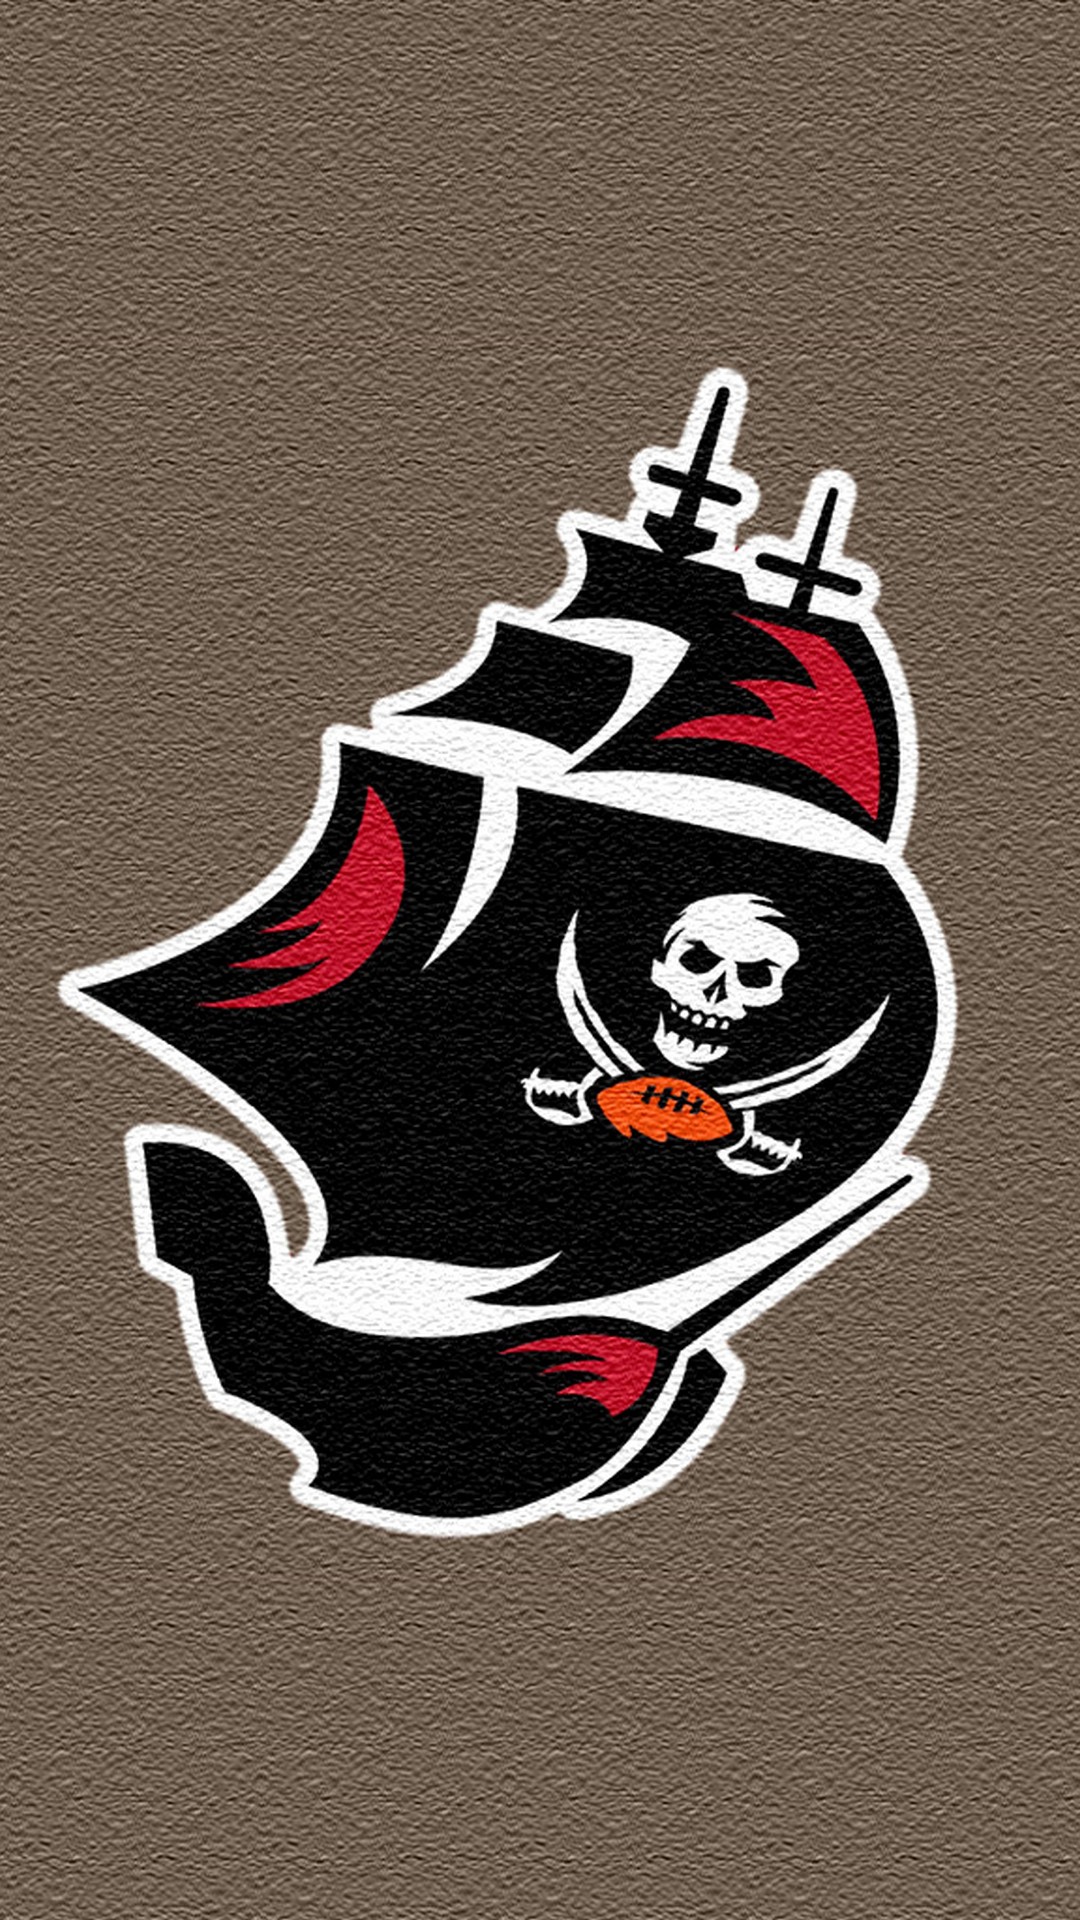 Buccaneers iPhone Screen Wallpaper With high-resolution 1080X1920 pixel. Donwload and set as wallpaper for your iPhone X, iPhone XS home screen backgrounds, XS Max, XR, iPhone8 lock screen wallpaper, iPhone 7, 6, SE, and other mobile devices